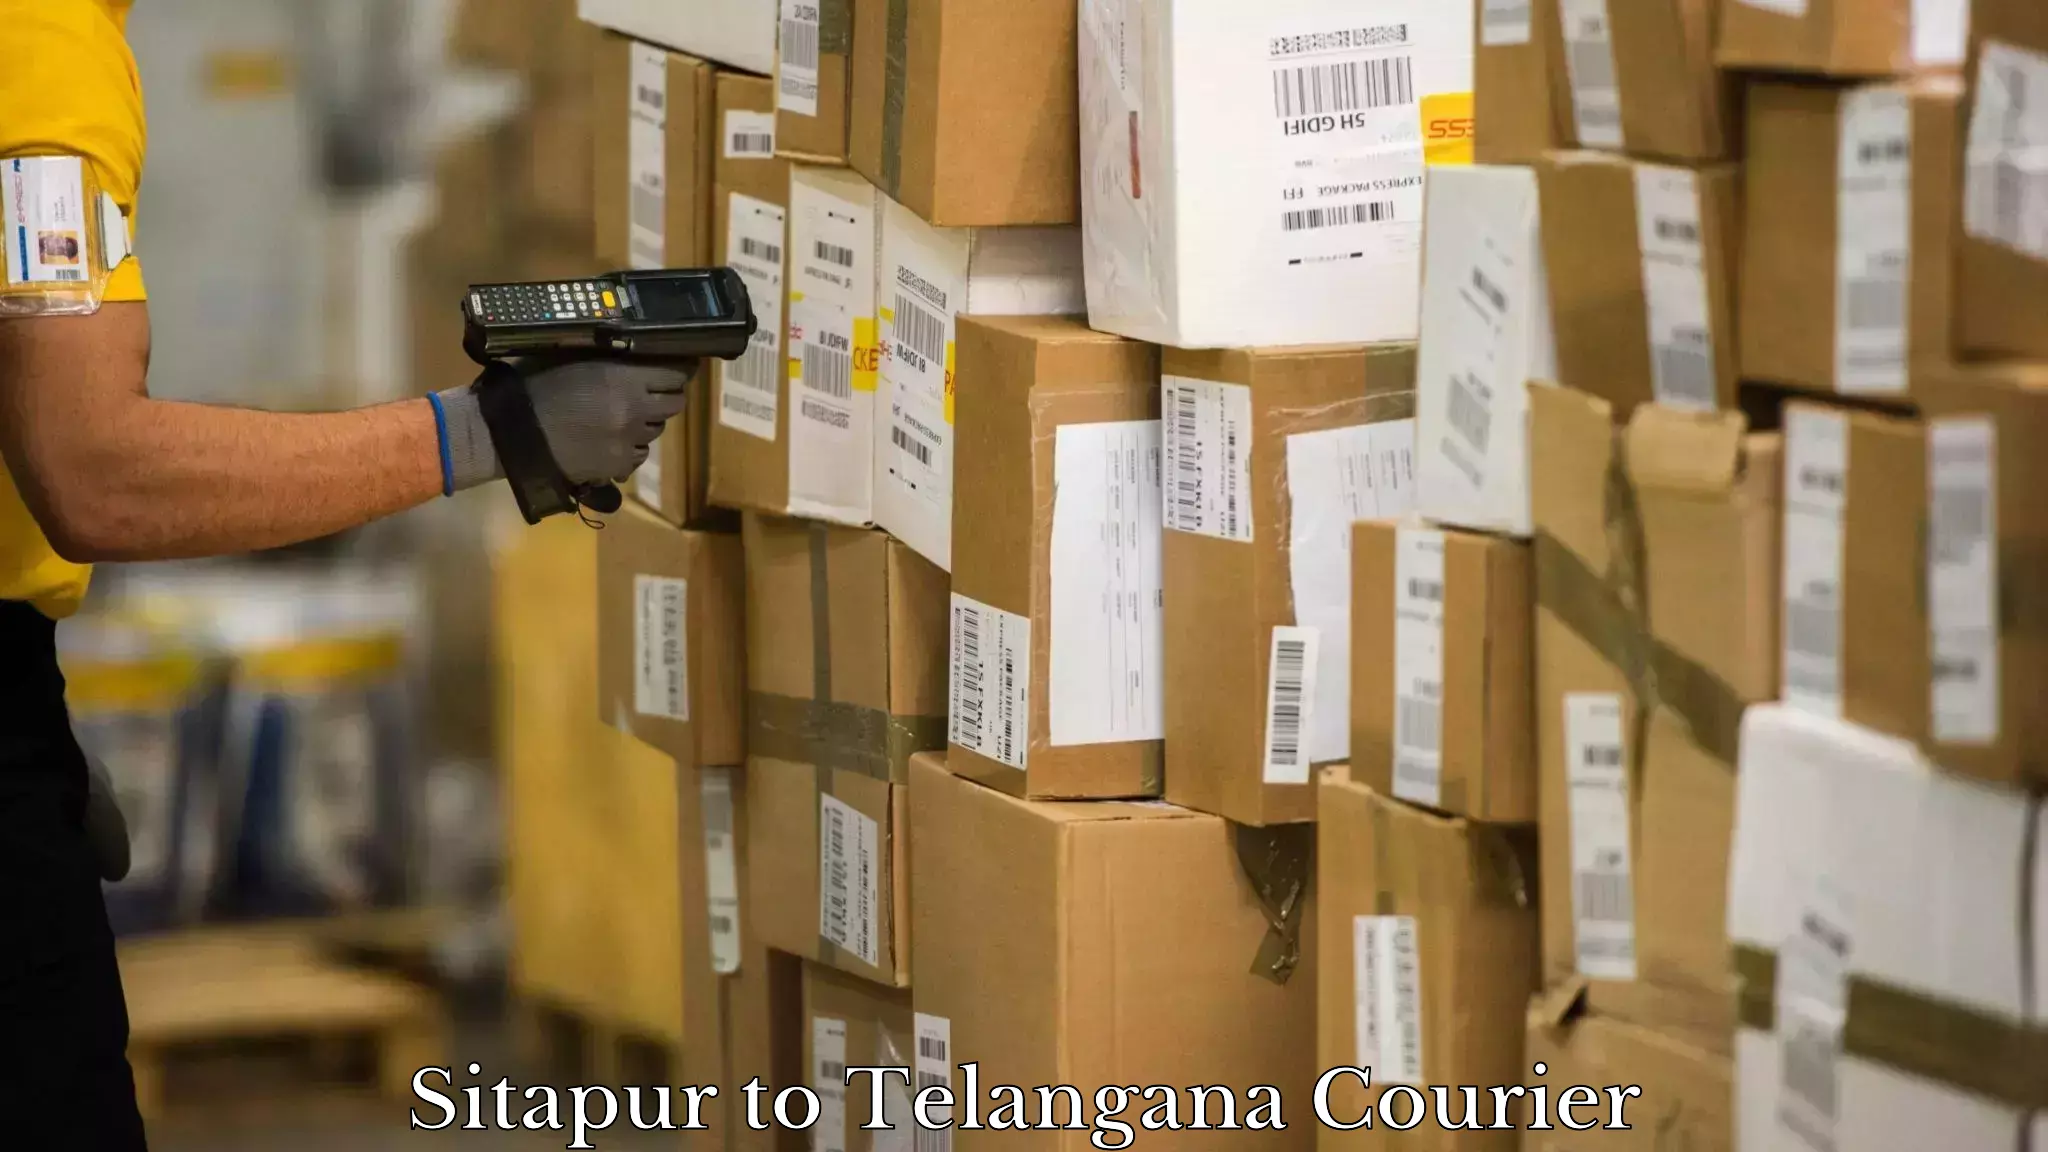 Professional courier handling Sitapur to Telangana